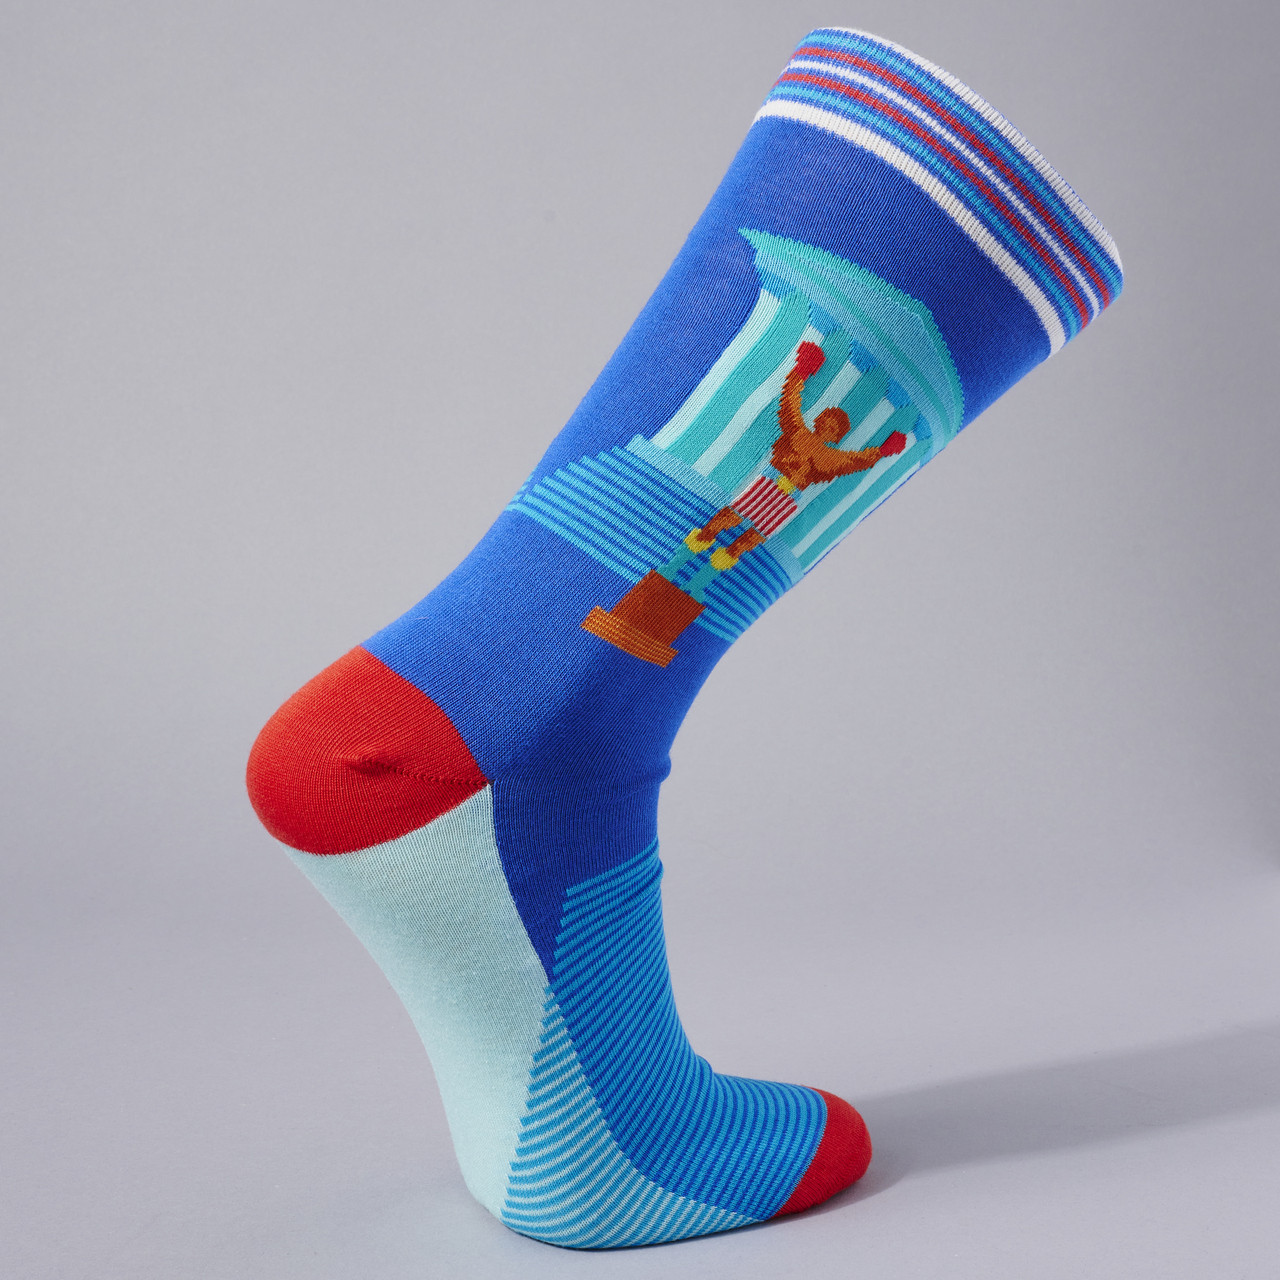 Athletic Socks that Give a Foot Bragging Rights - The New York Times